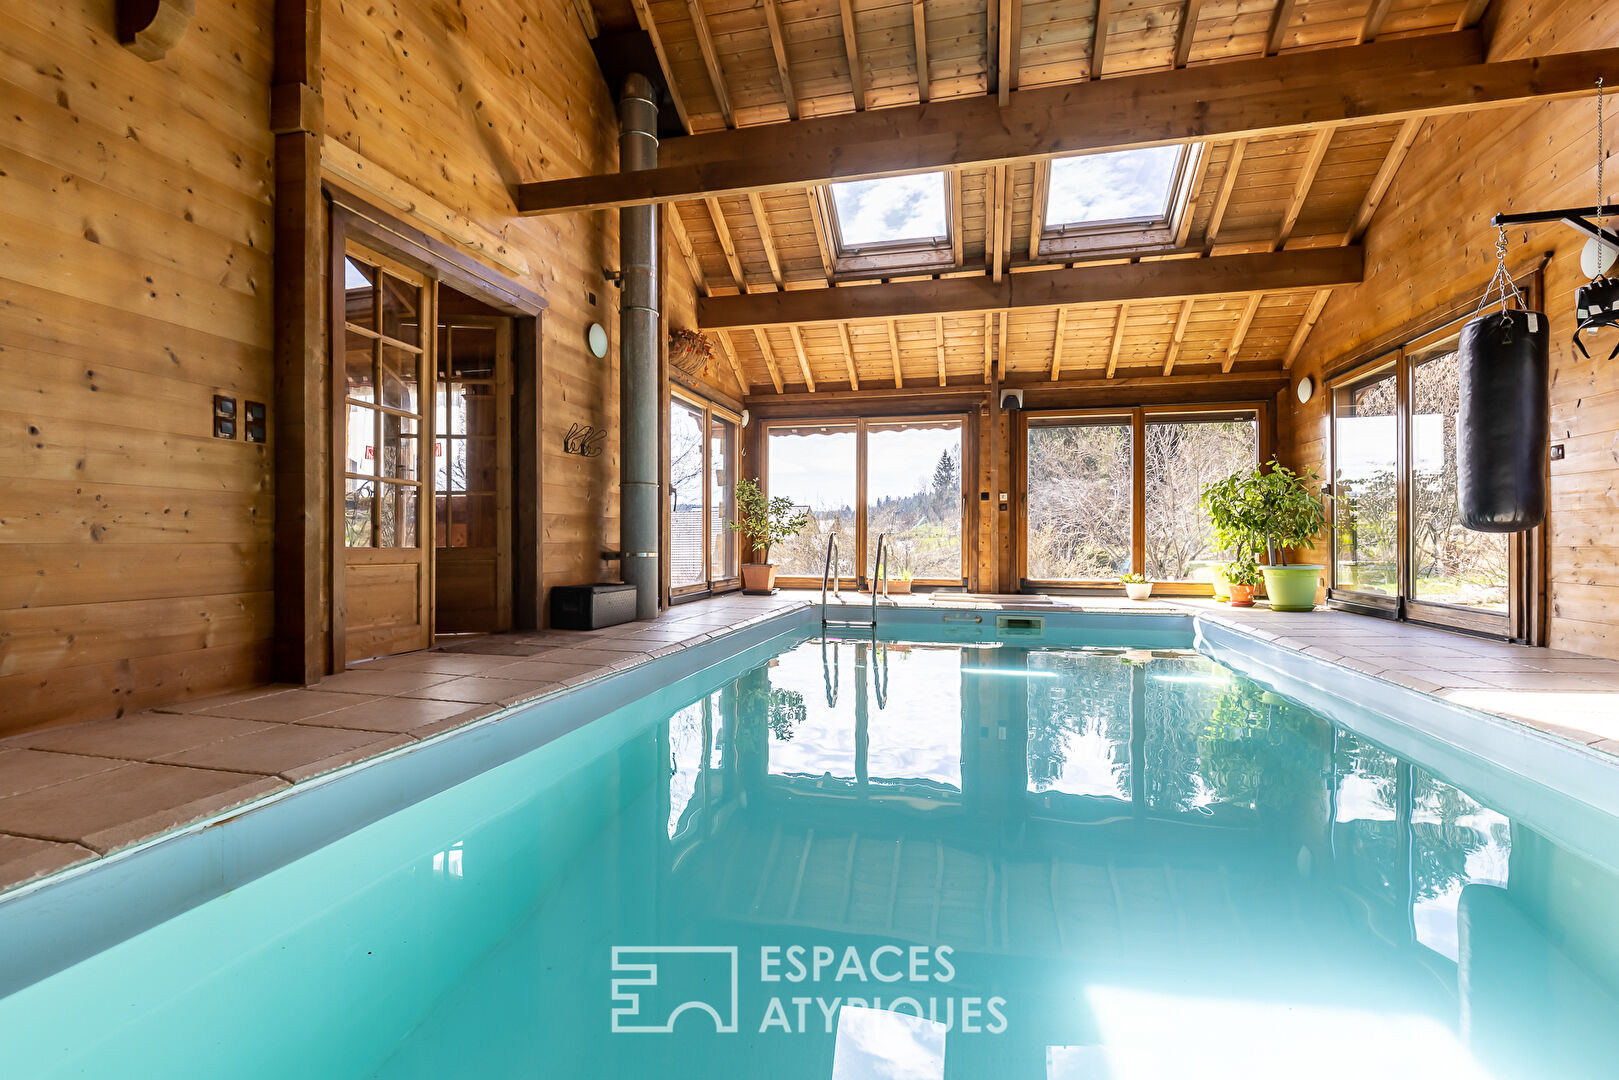 The real log cabin with its indoor swimming pool